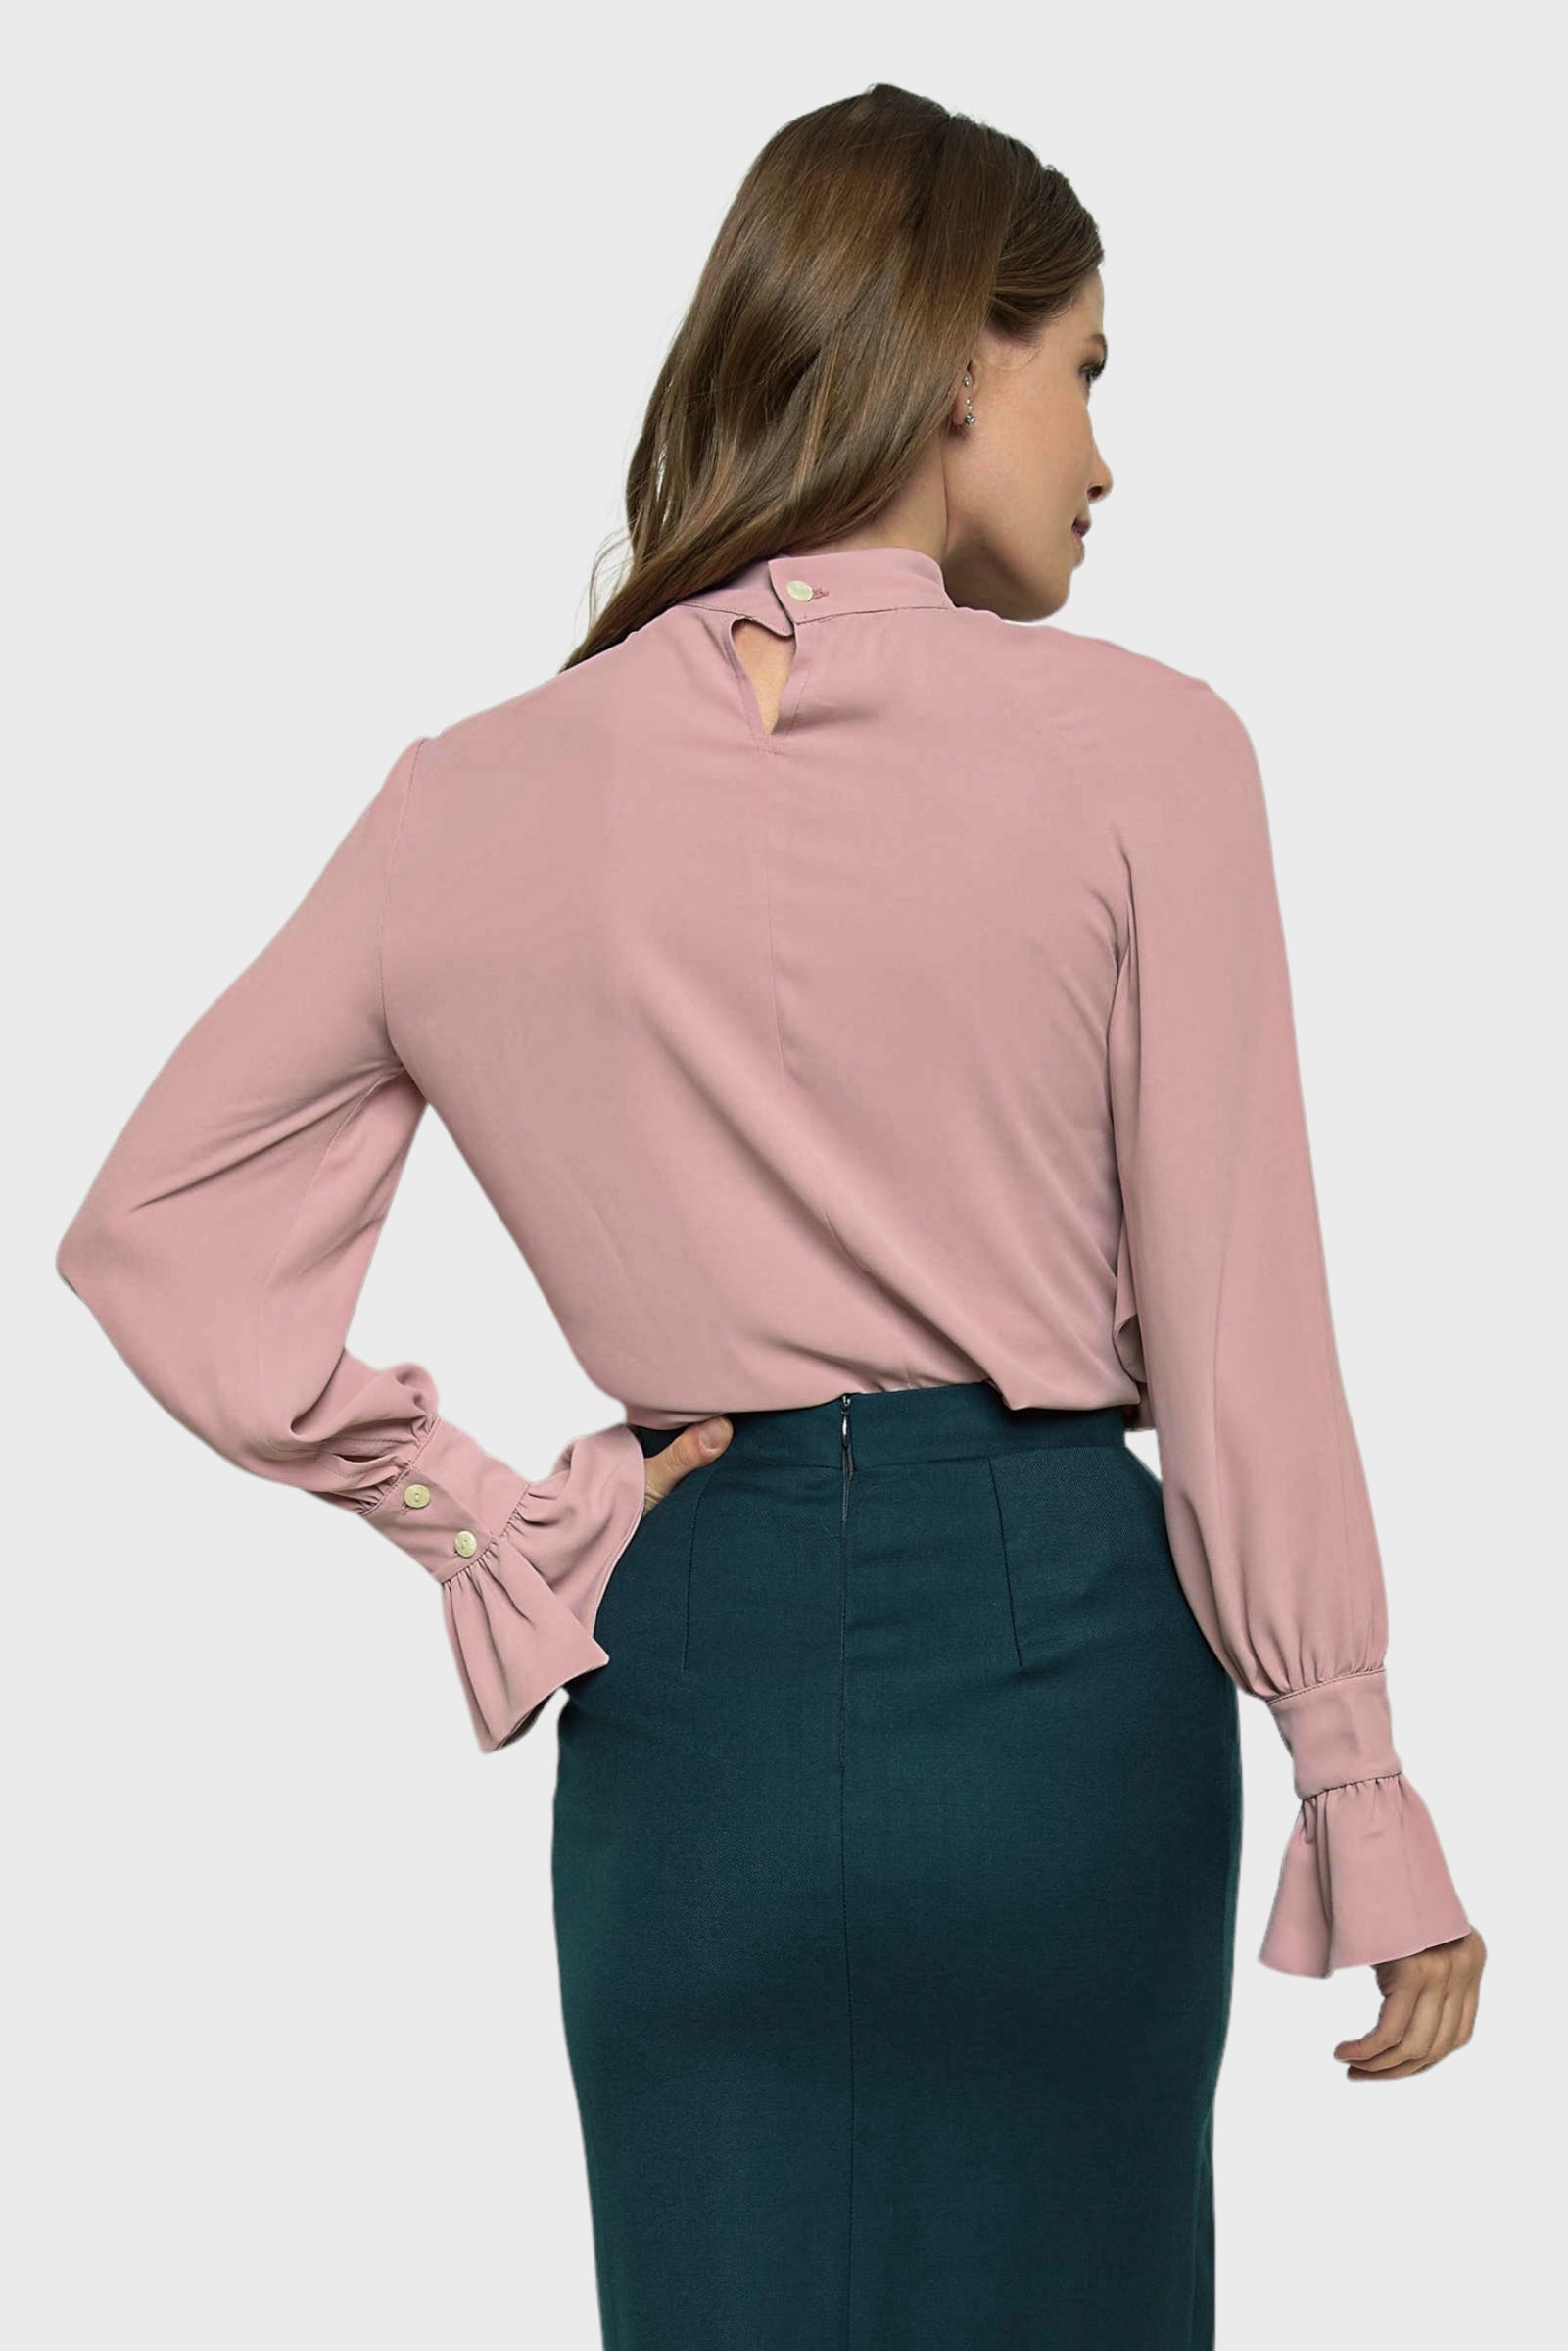 Anna Rose Pink Ruffled Georgette Blouse Top by Sara Sabella Italian Women's Fashion Paired with Audrey Blue Marine Suit Skirt